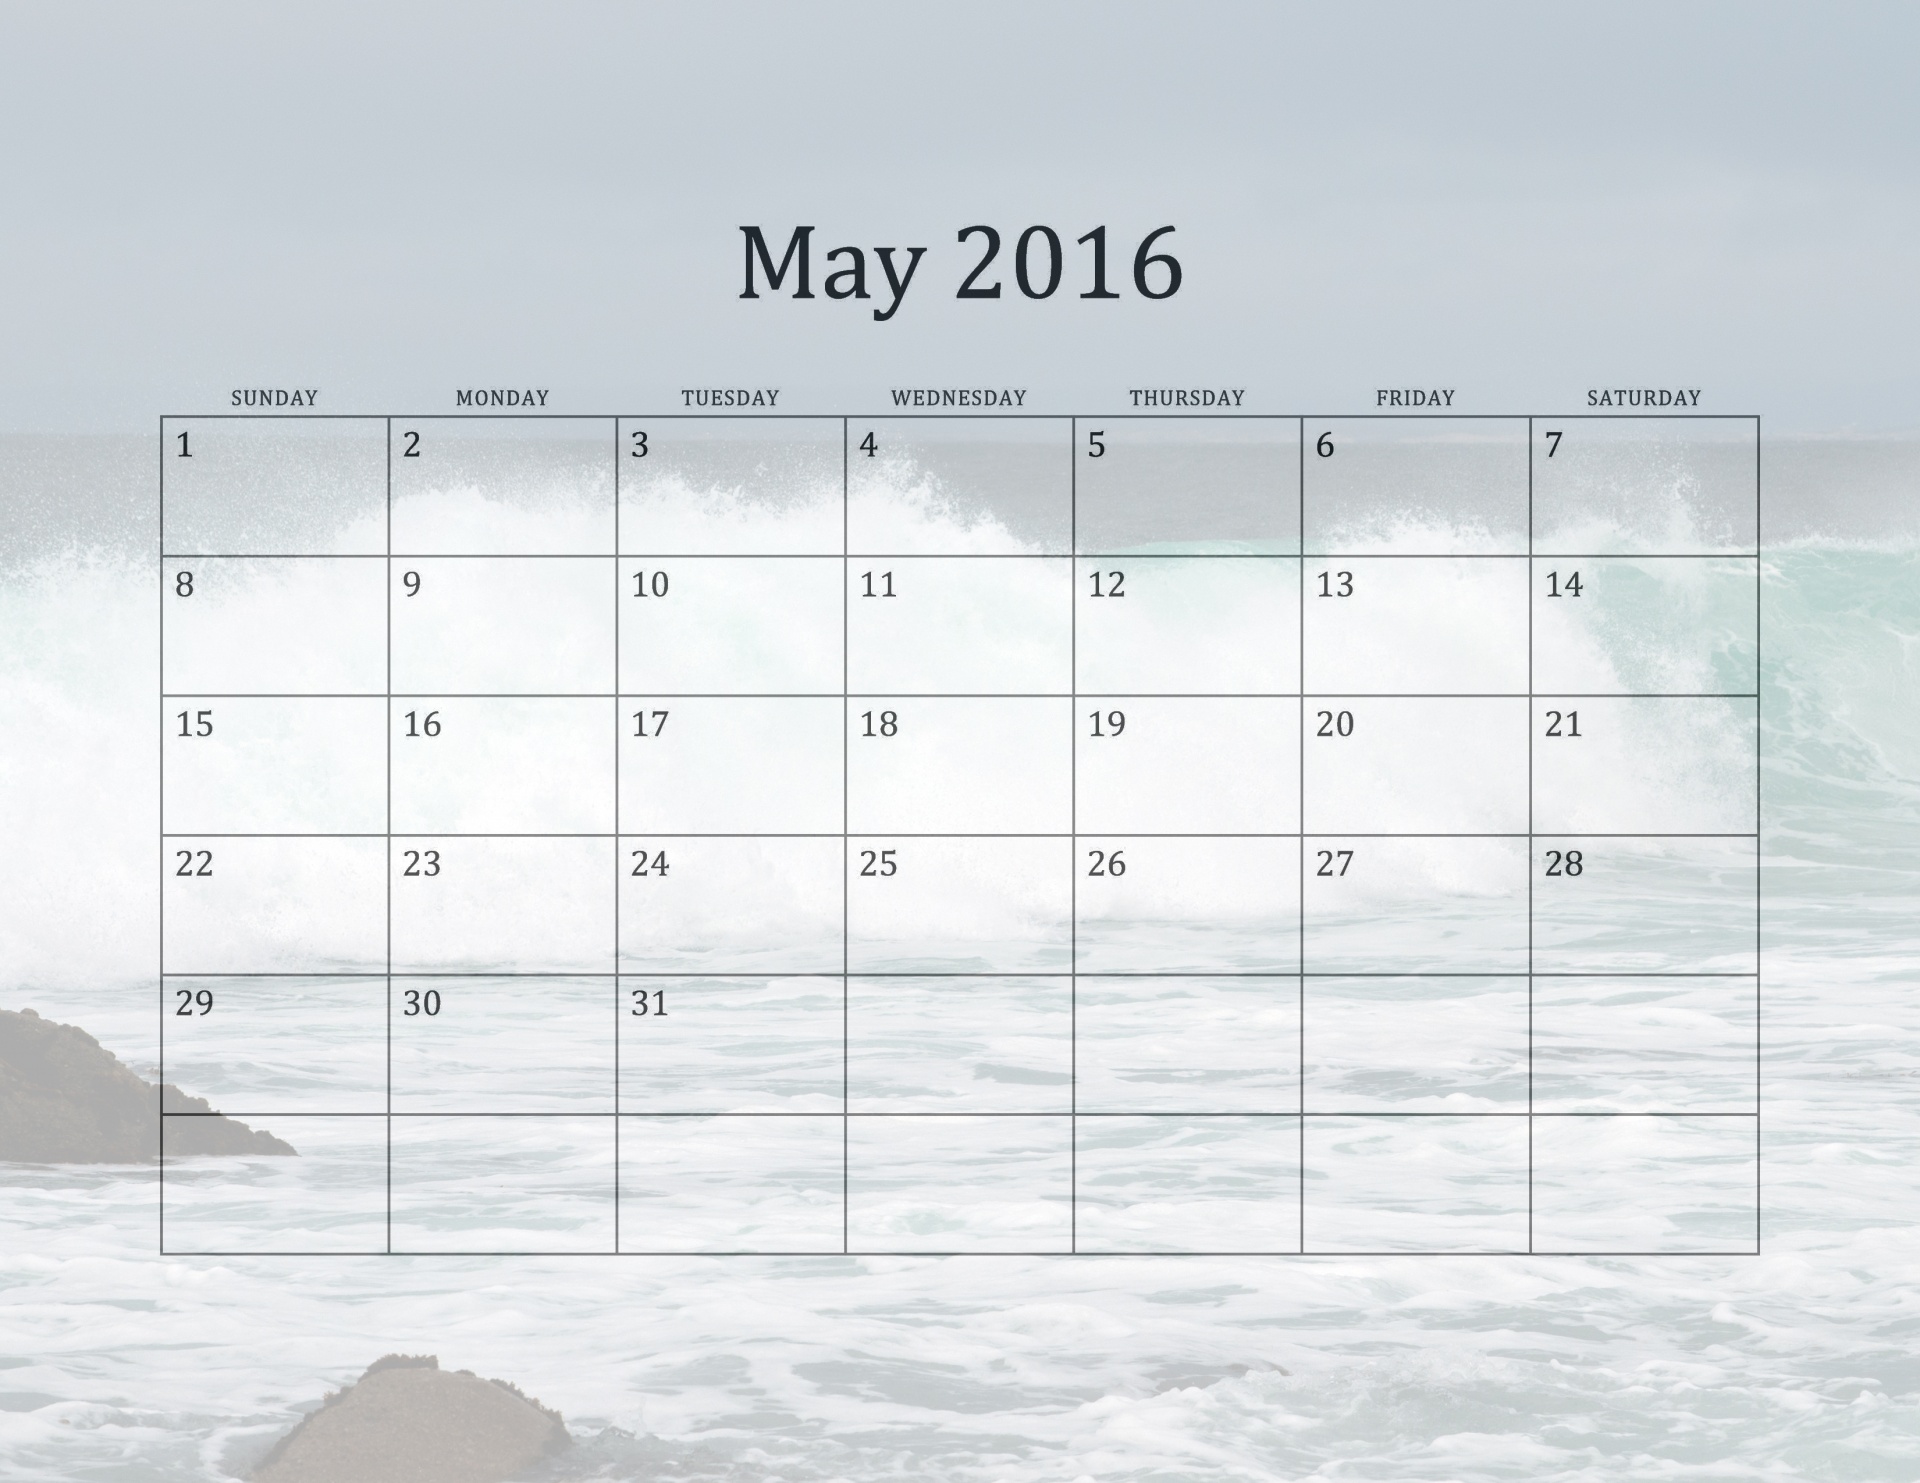 Calendar for May 2016 with California Beaches in the background. May shows a crashing wave from Laguna Beach, California